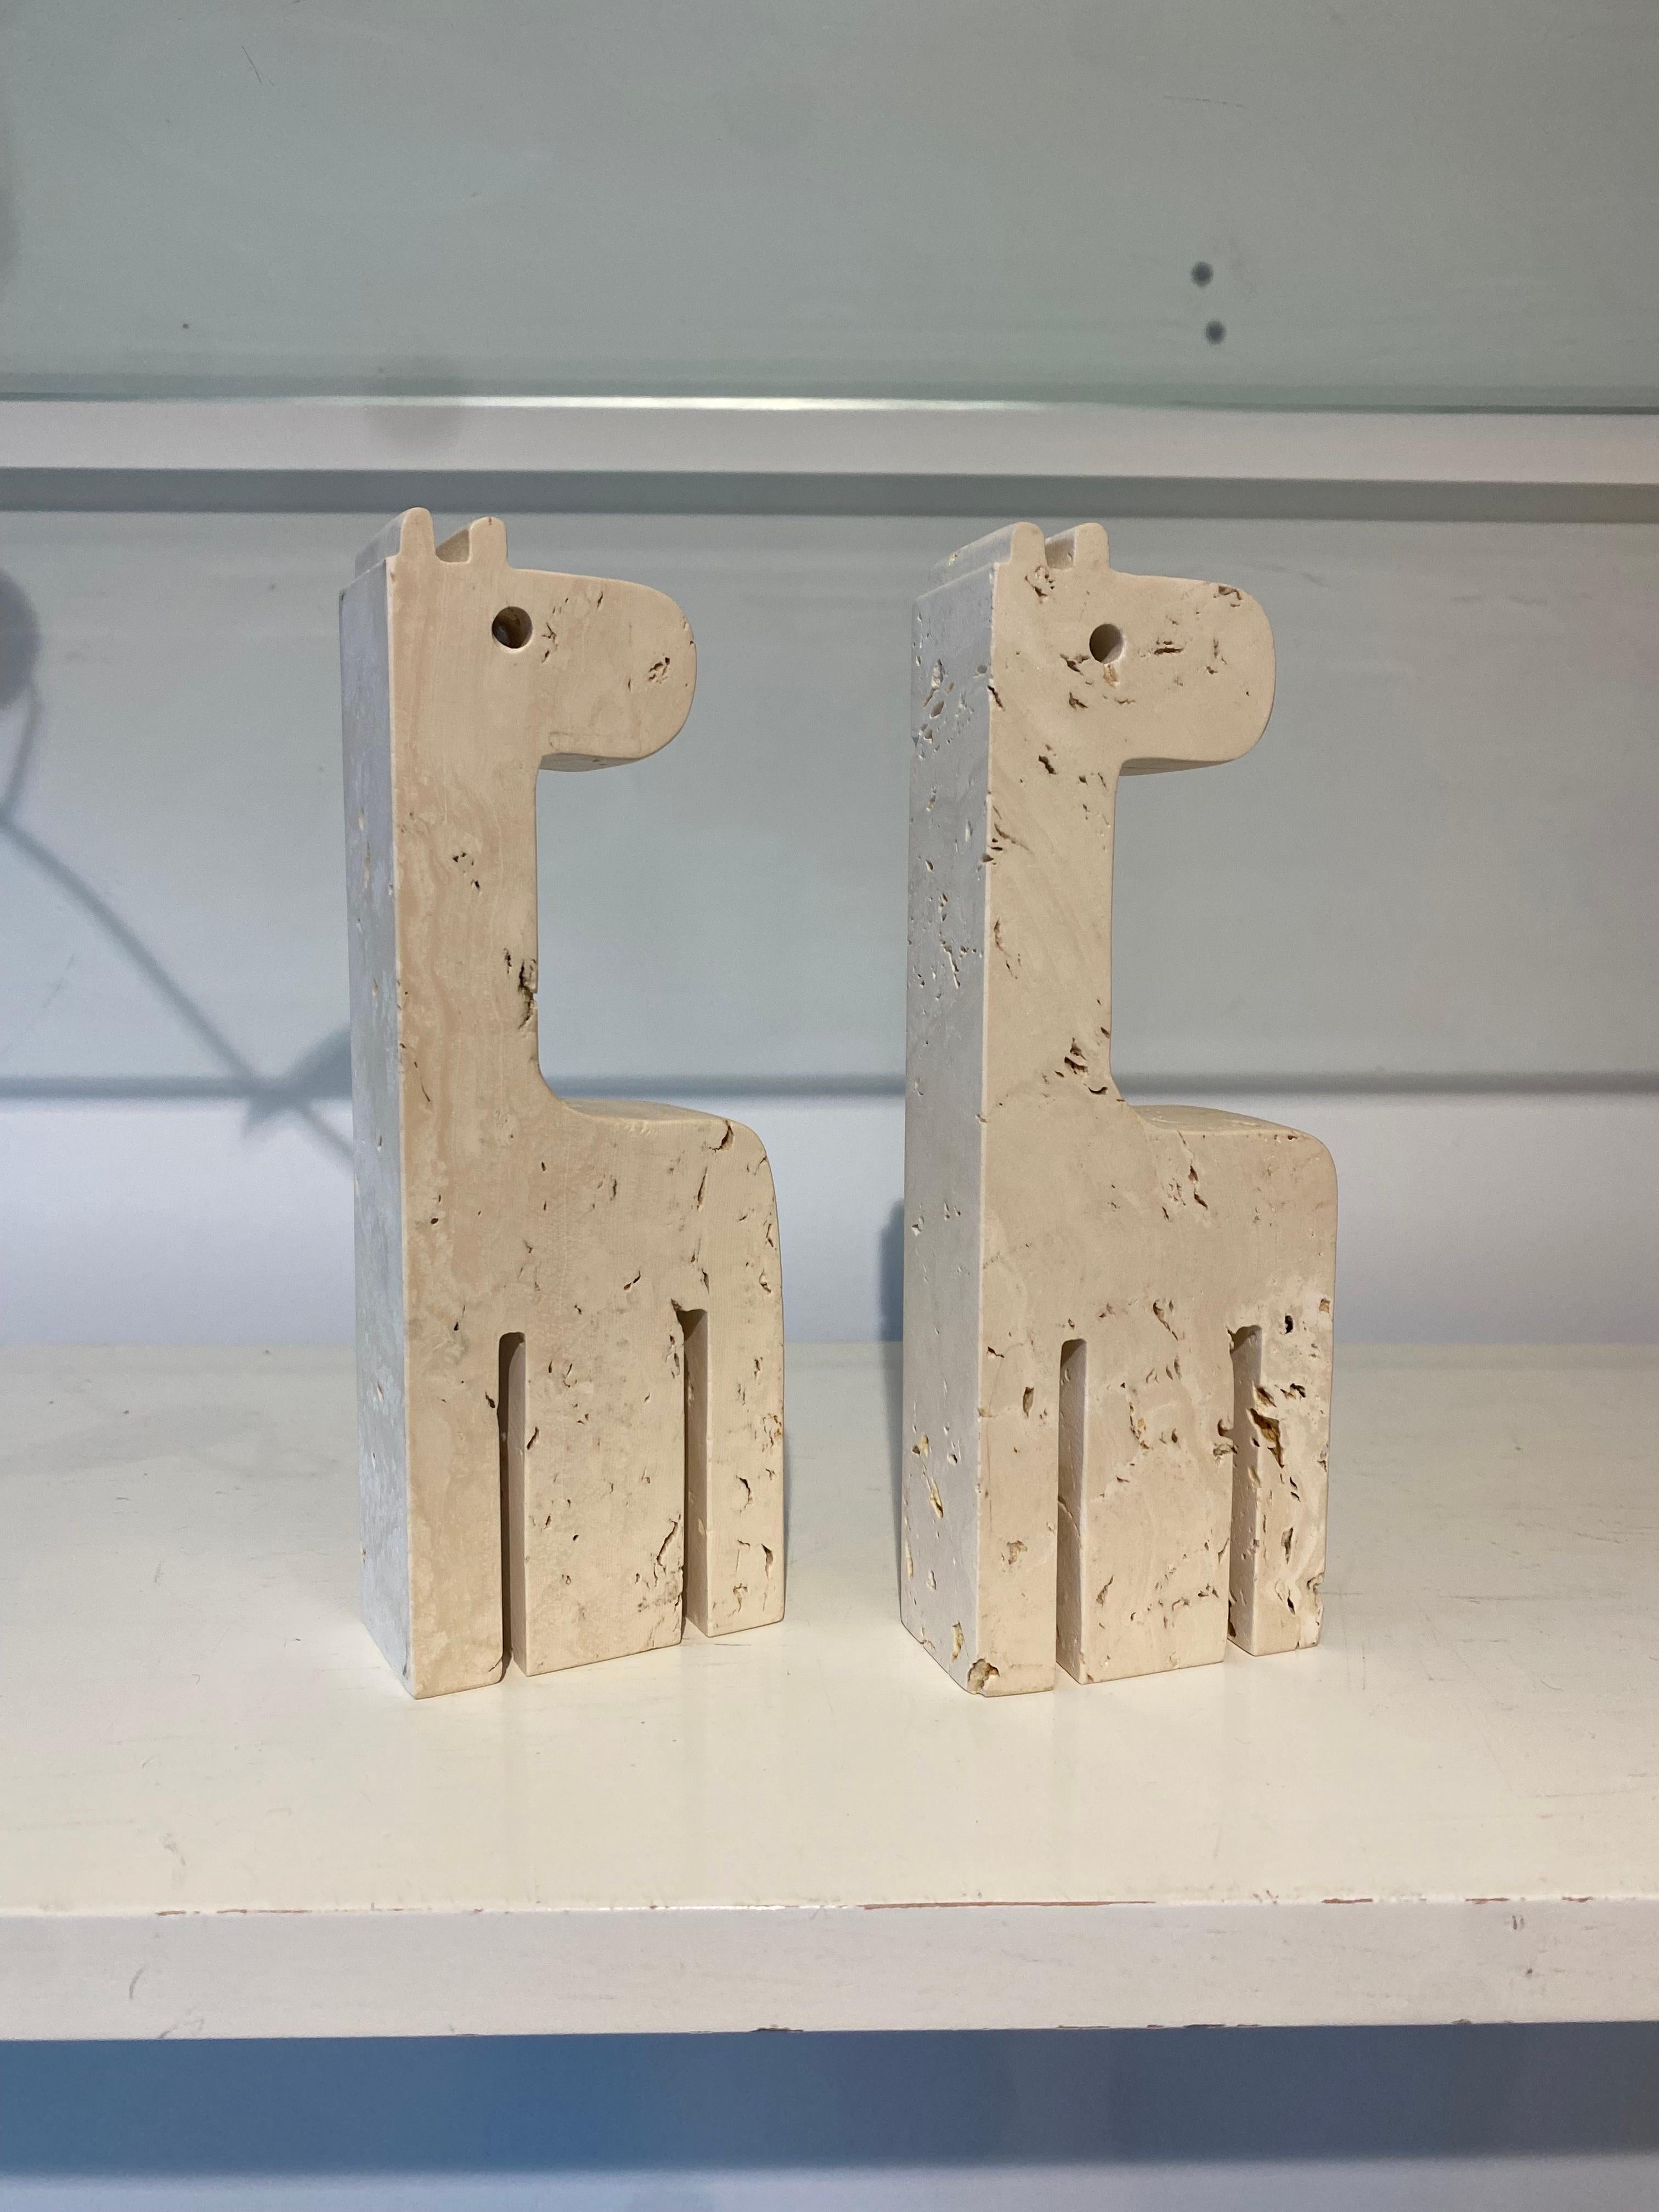 Sculpted travertine giraffe pair by Fratelli Mannelli of Italy, circa the 1970’s. 

In excellent condition. 

Slight variance in size between the two due to the handmade nature.